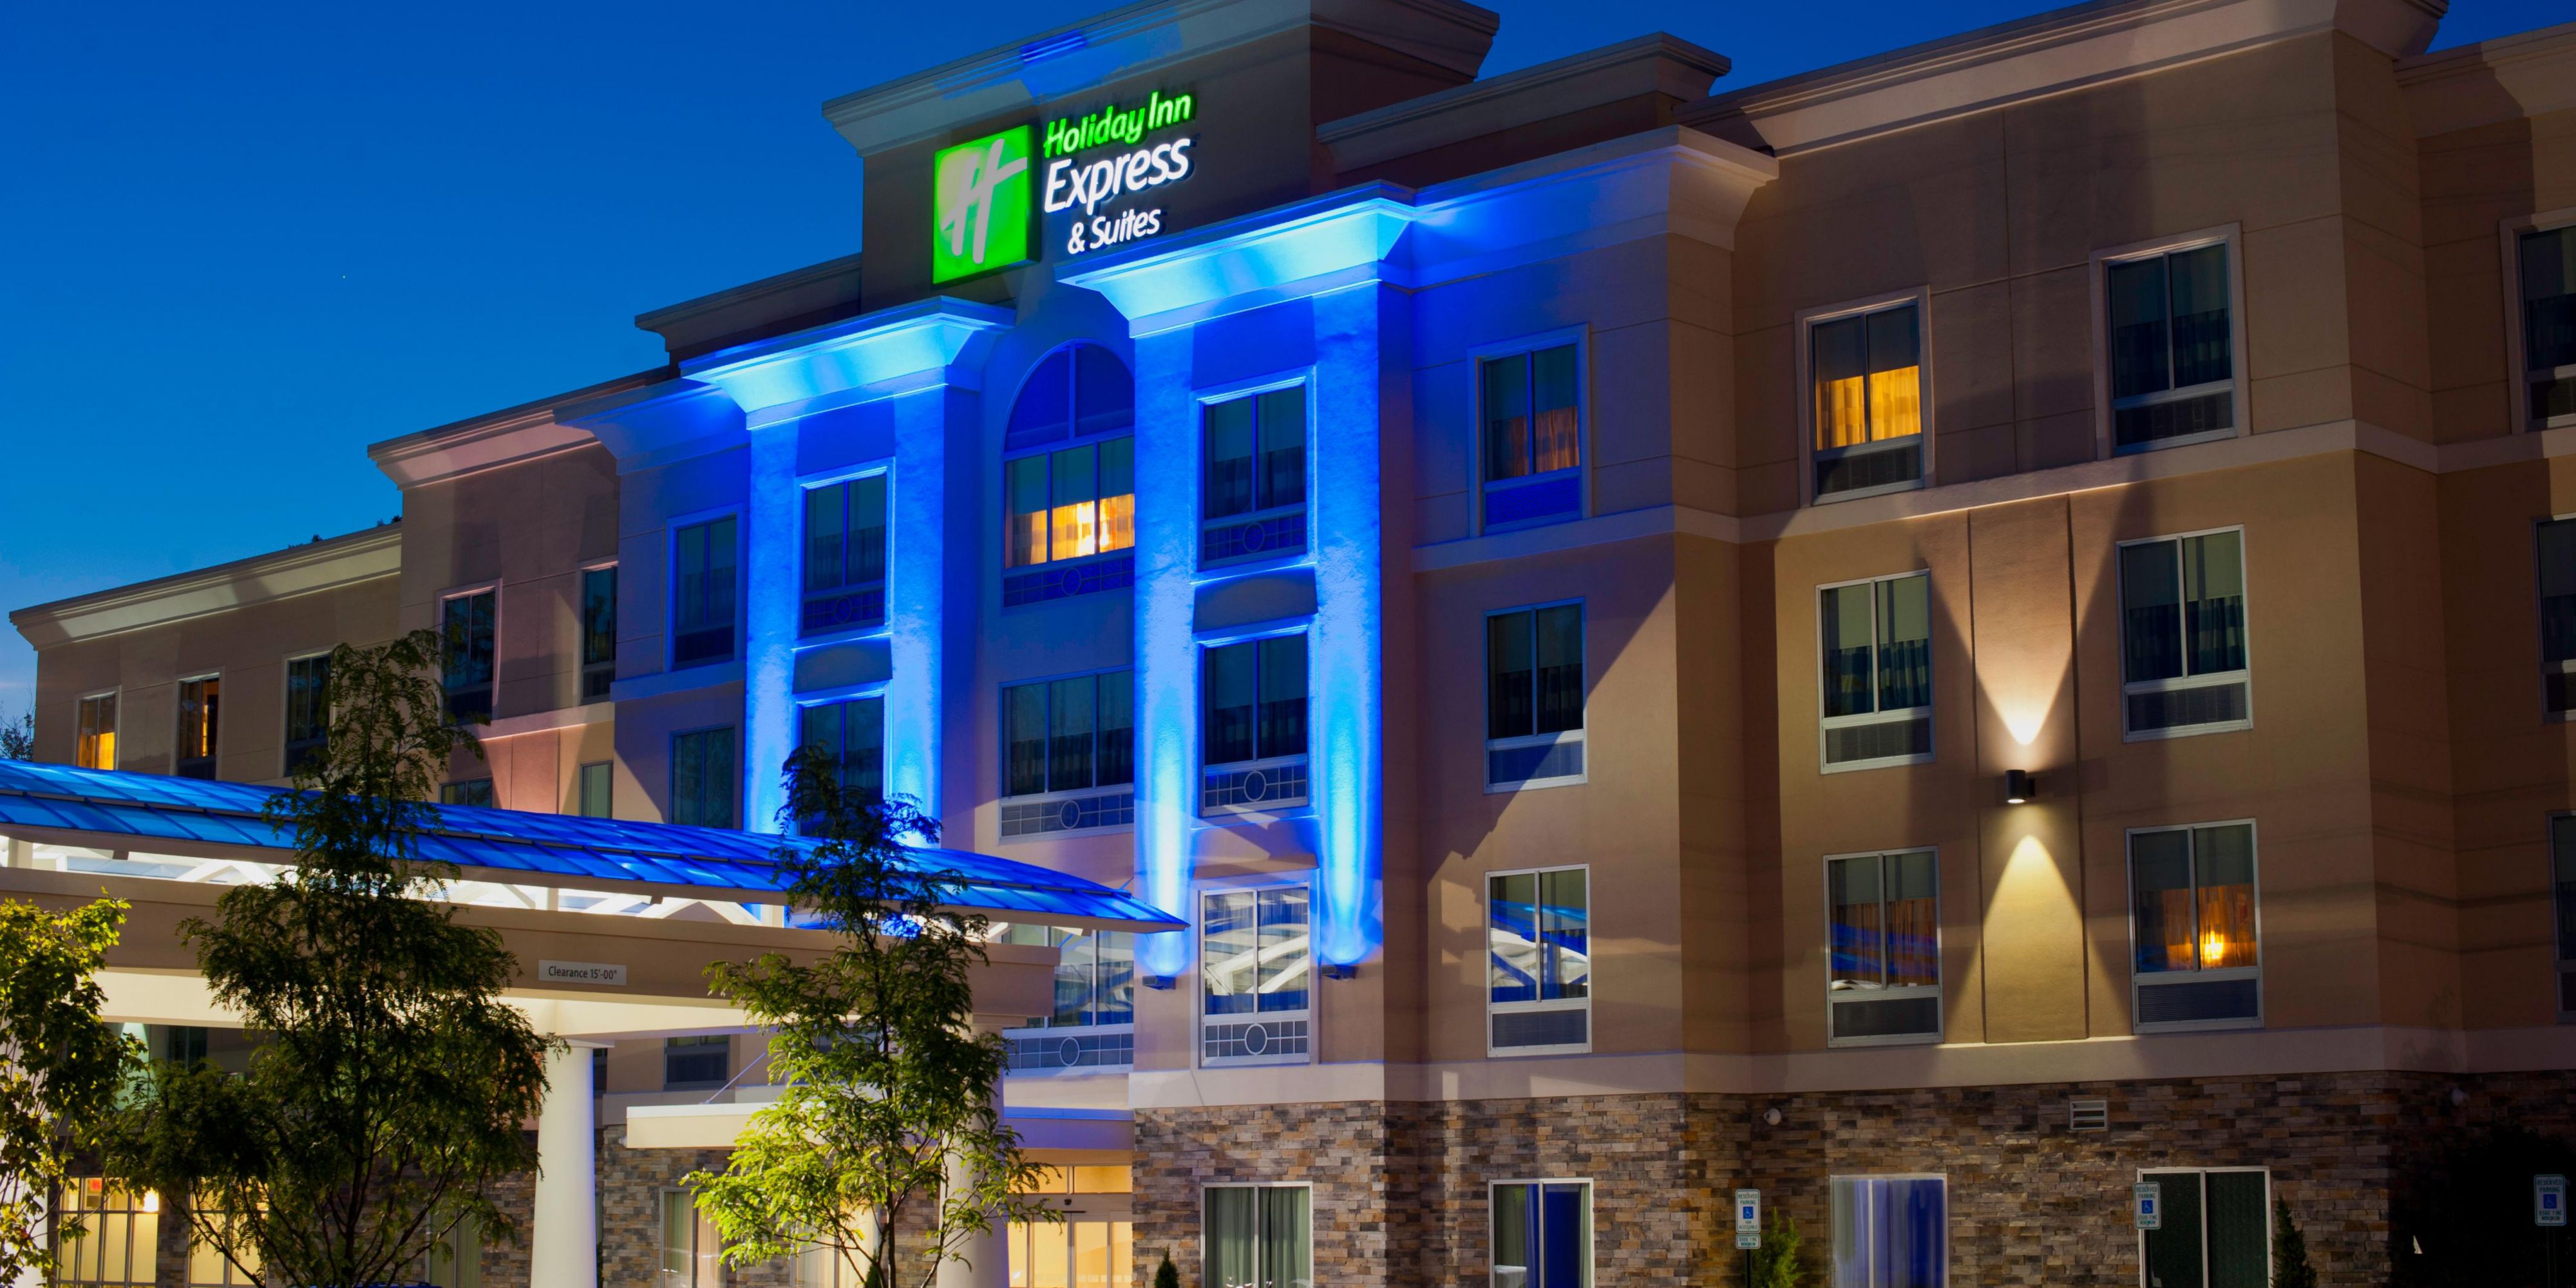 The Holiday Inn Express Columbus Easton is located 1 mile from the Easton Town Center, the Midwest's premier shopping, dining and entertainment destination! Bring the kids and spend the day at Lego Land or American Girl Doll and spend the night watching a movie at the AMC Theatre! Your family will enjoy our complimentary Express Start Breakfast!